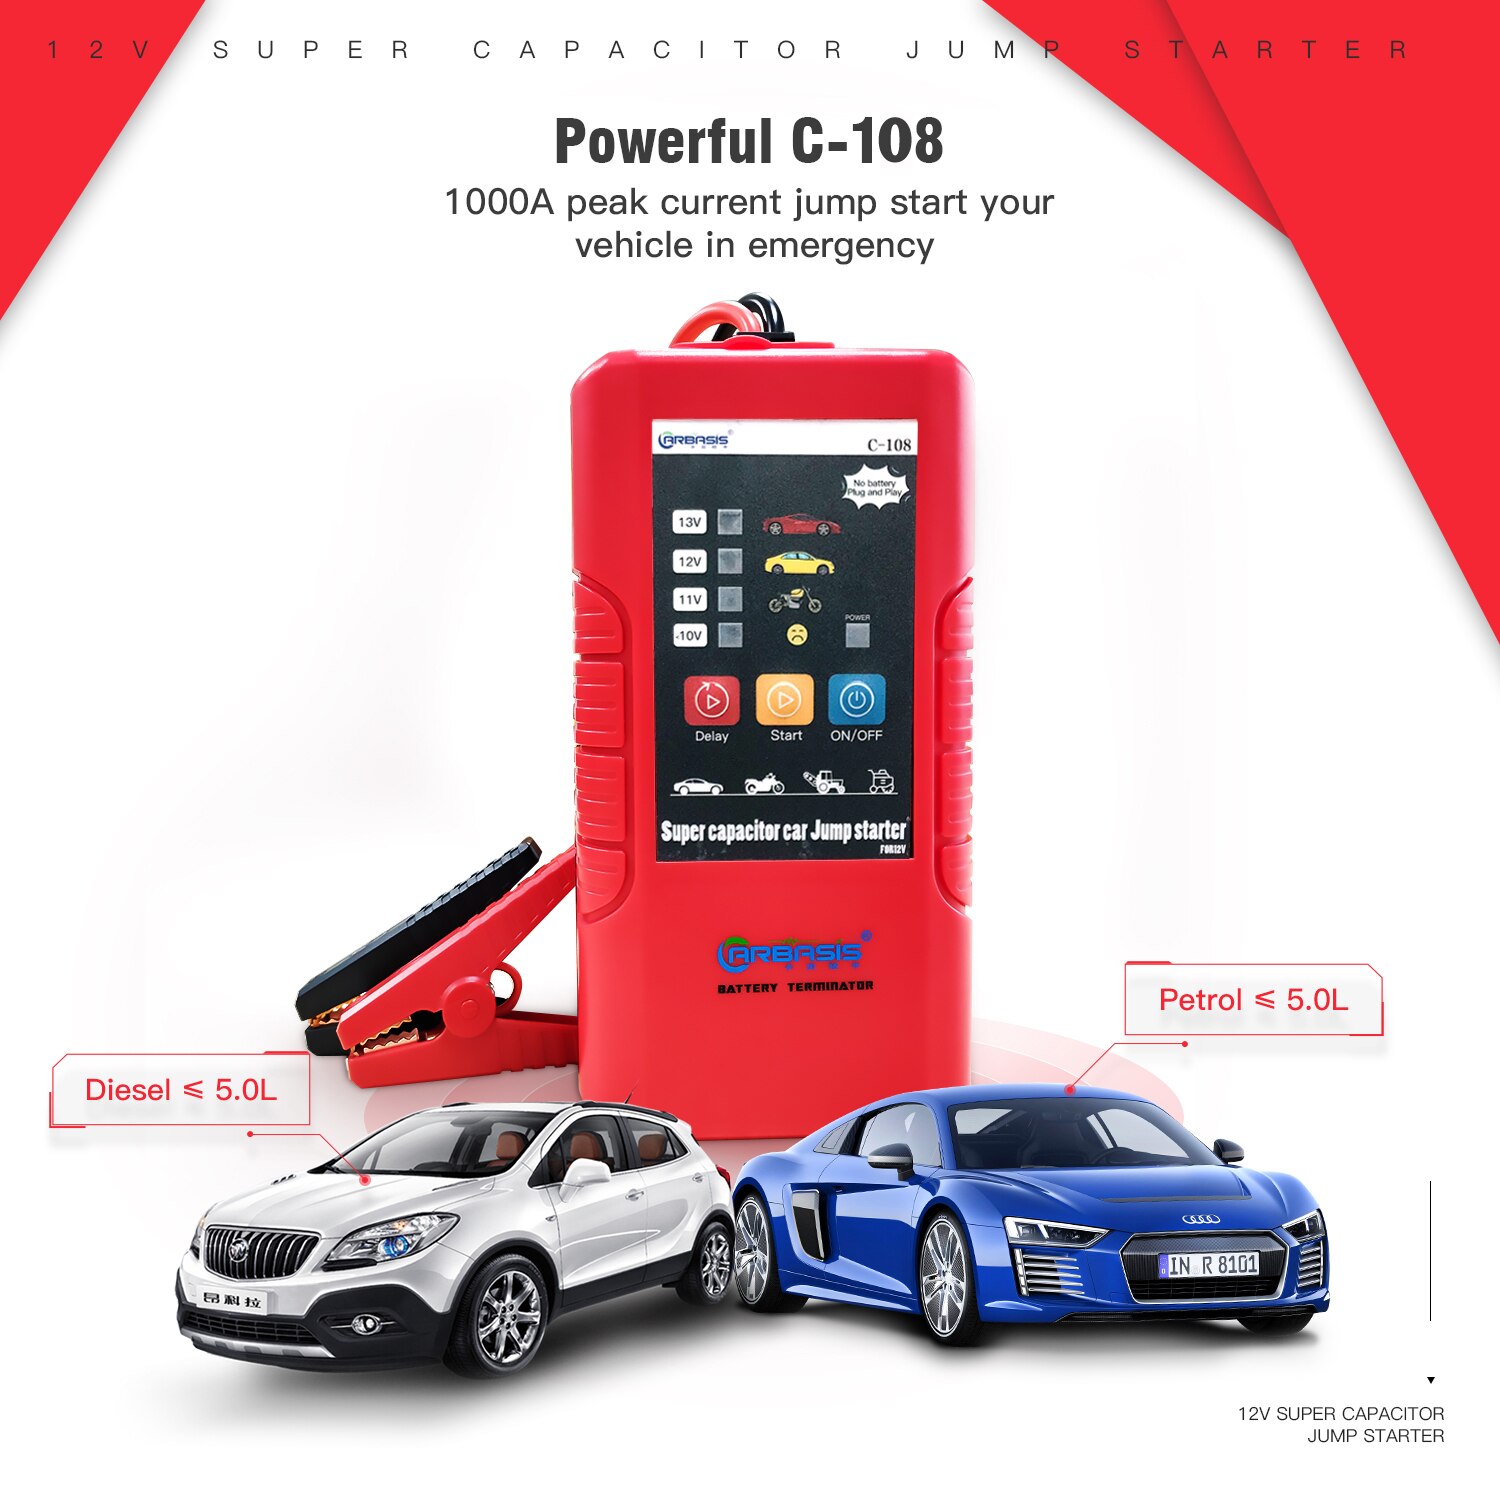 12V SUPER CAPACITOR JUMP STARTER Car Accessories Power Bank Automobile Starting Power Supply without LCD Display